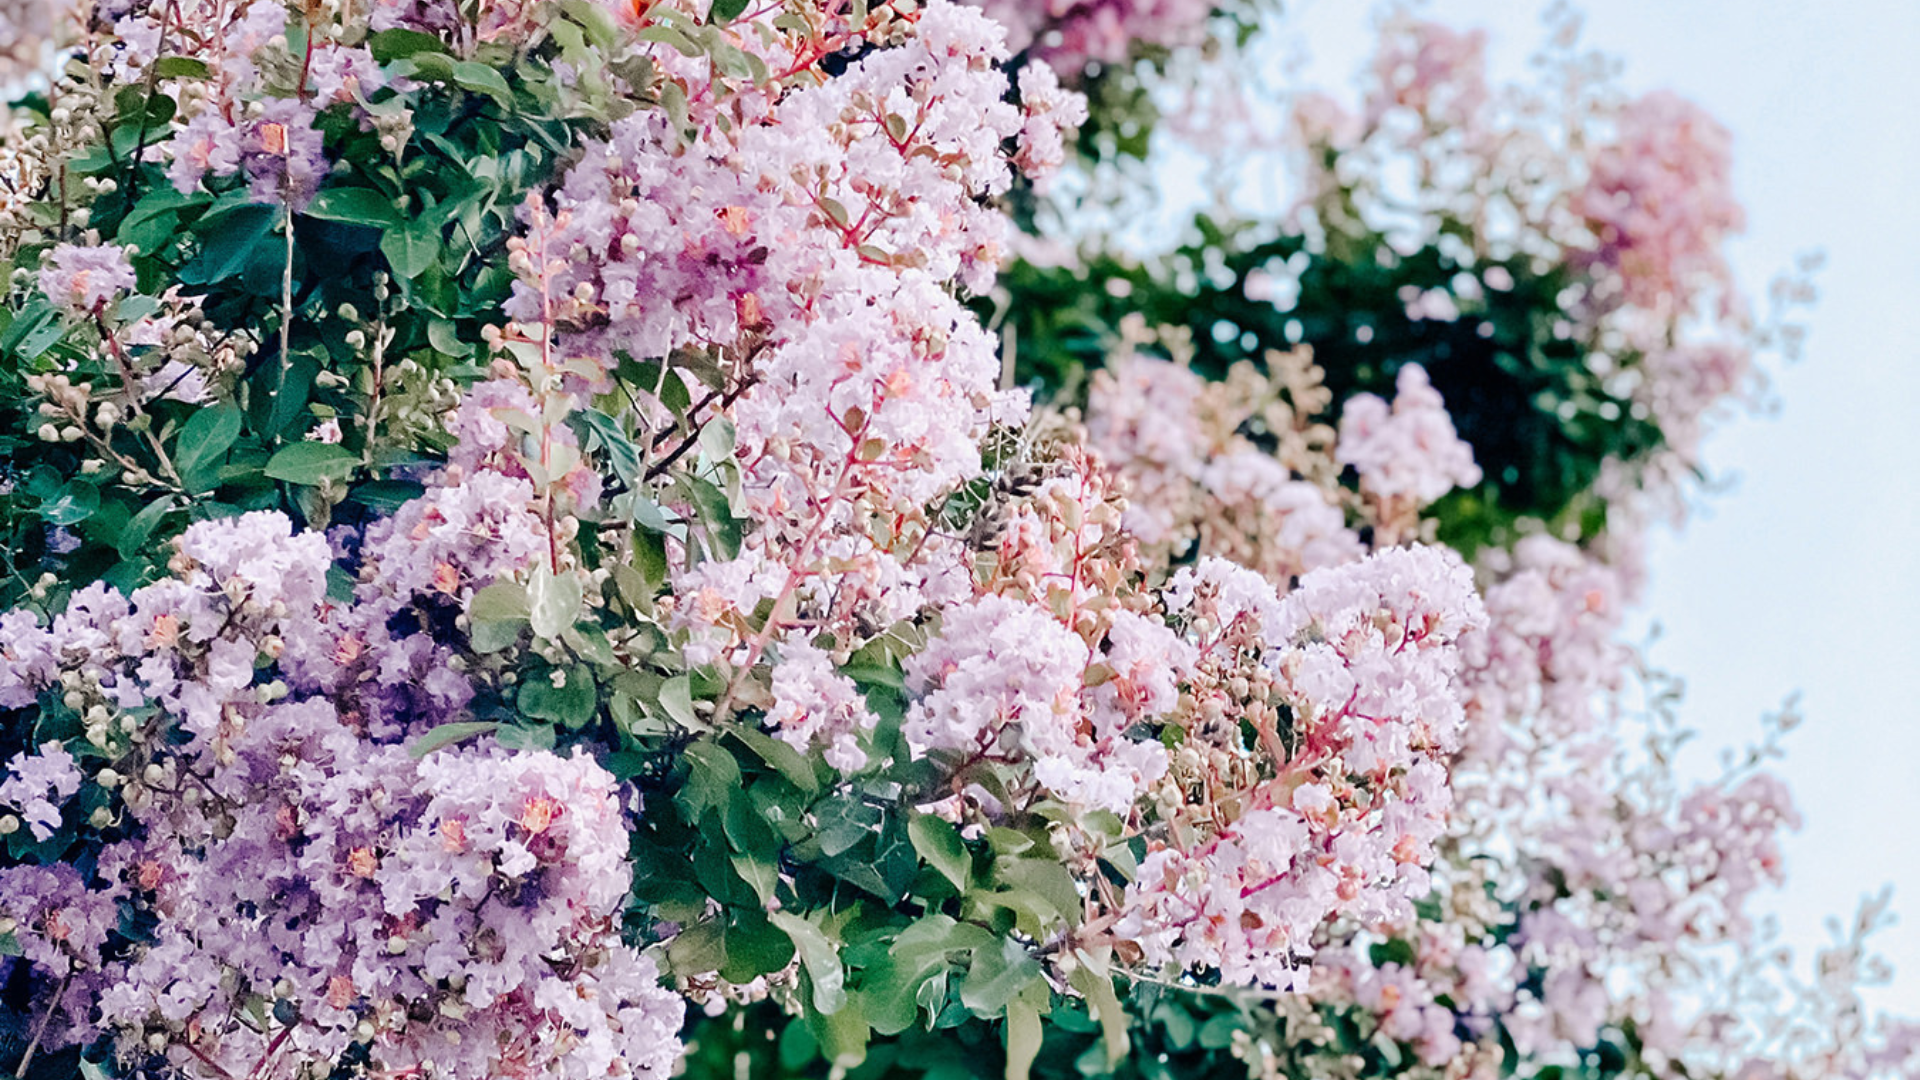 75 Gorgeous Spring Wallpaper Downloads For Your iPhone